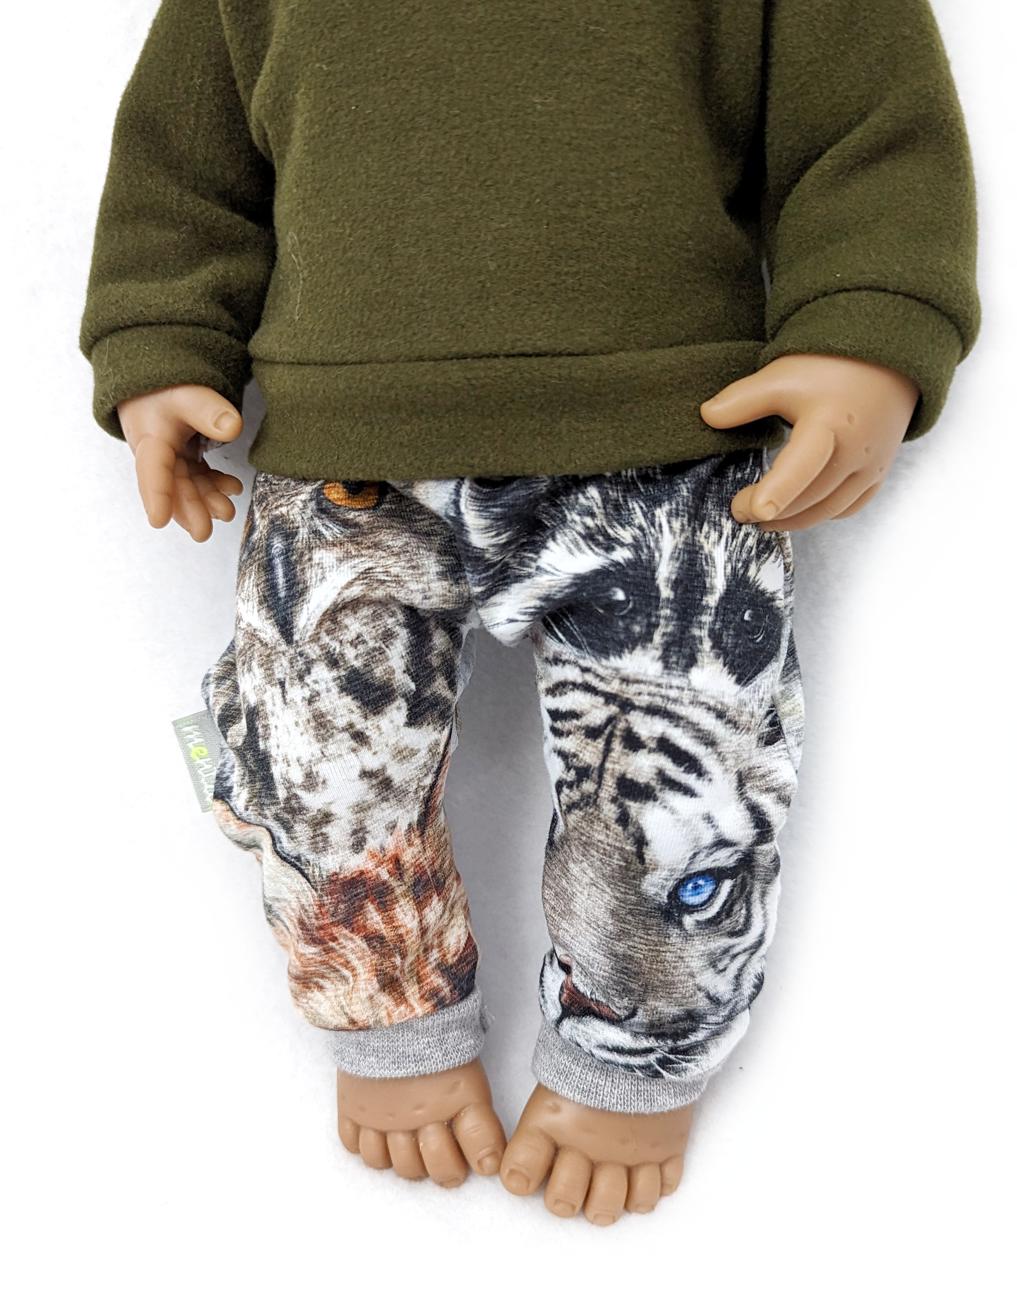 Baggy Pants + Dino Add-on 13" to 15" Dolls